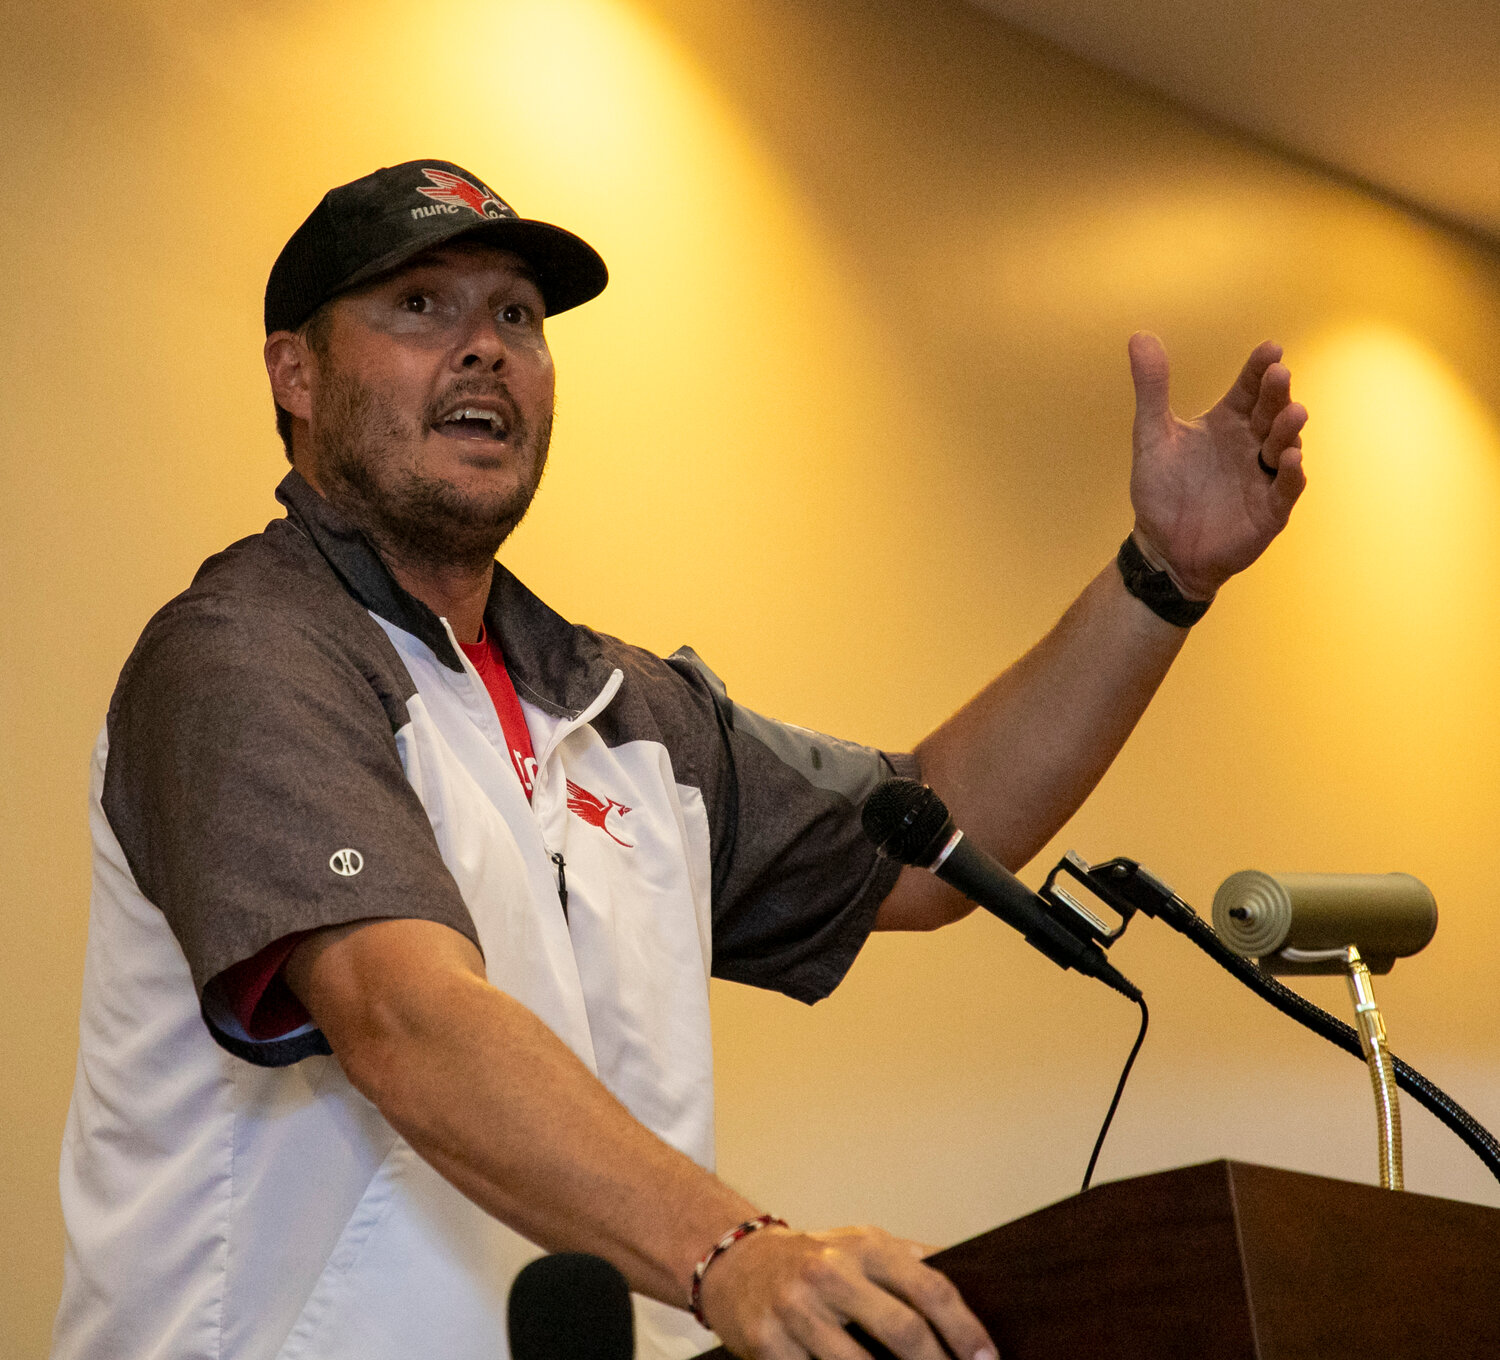 St. Michael head football coach Philip Rivers meets with the press in Daphne on July 31 as part of Baldwin County Media Days at Bryant Bank. Rivers’ son Gunner, a freshman, is set to take over the Cardinals’ offense this season.